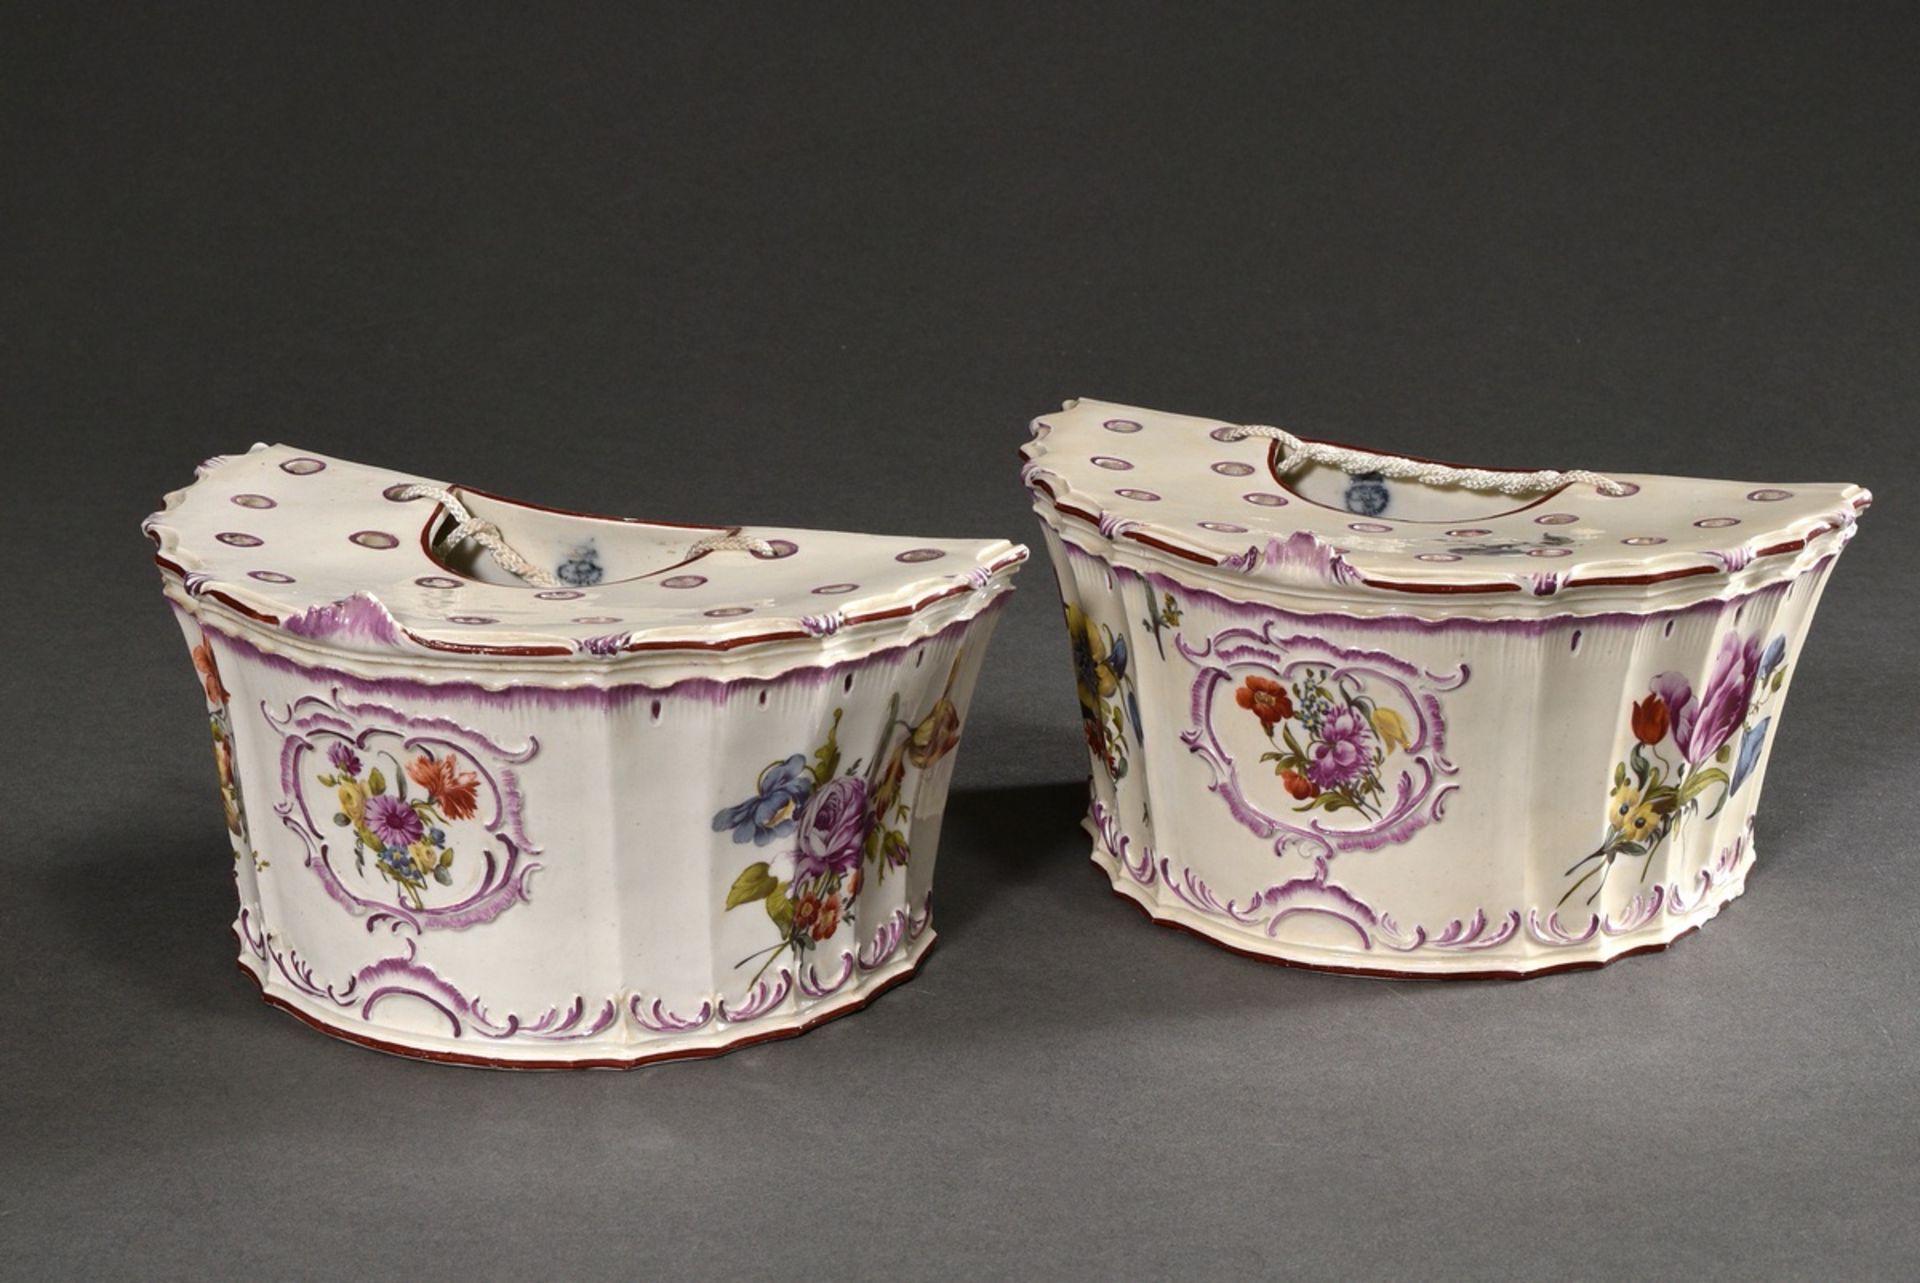 Pair of porcelain jardinières with rocailles in relief and polychrome flower painting, Ludwigsburg  - Image 2 of 8